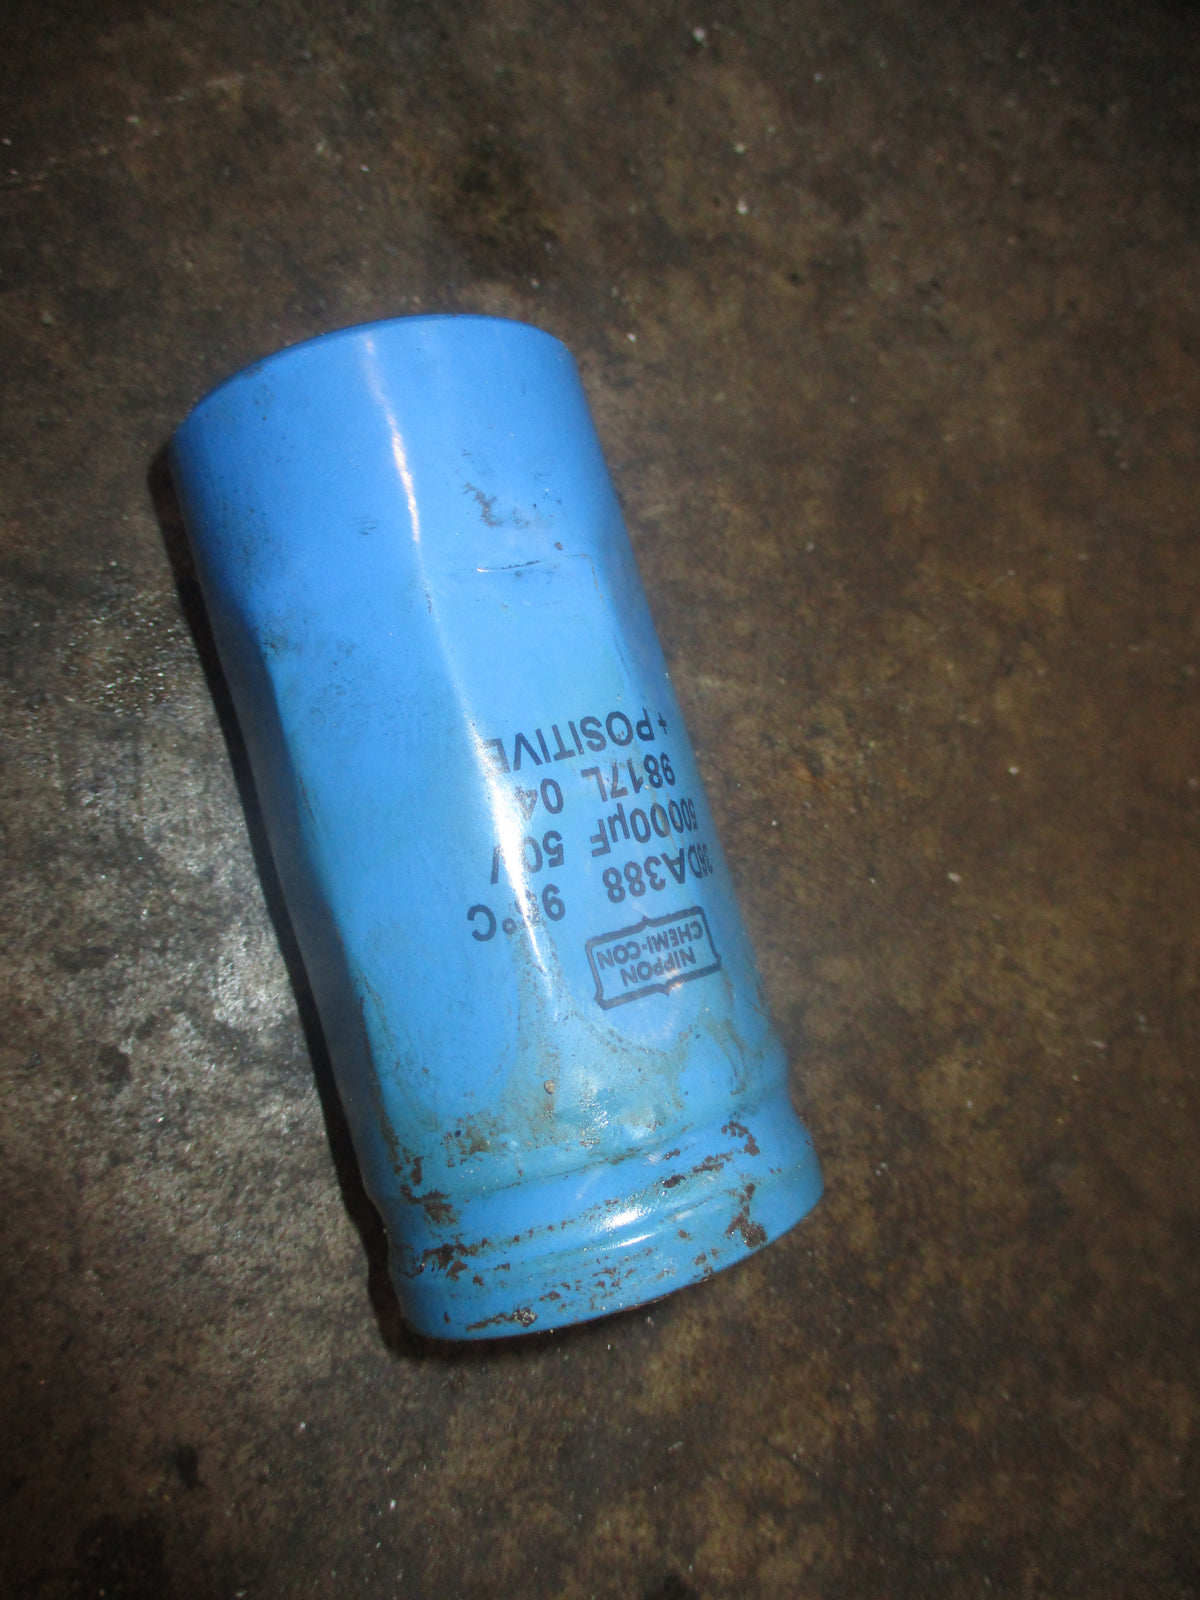 Evinrude Ficht 90hp 2 stroke outboard capacitor (3010206)